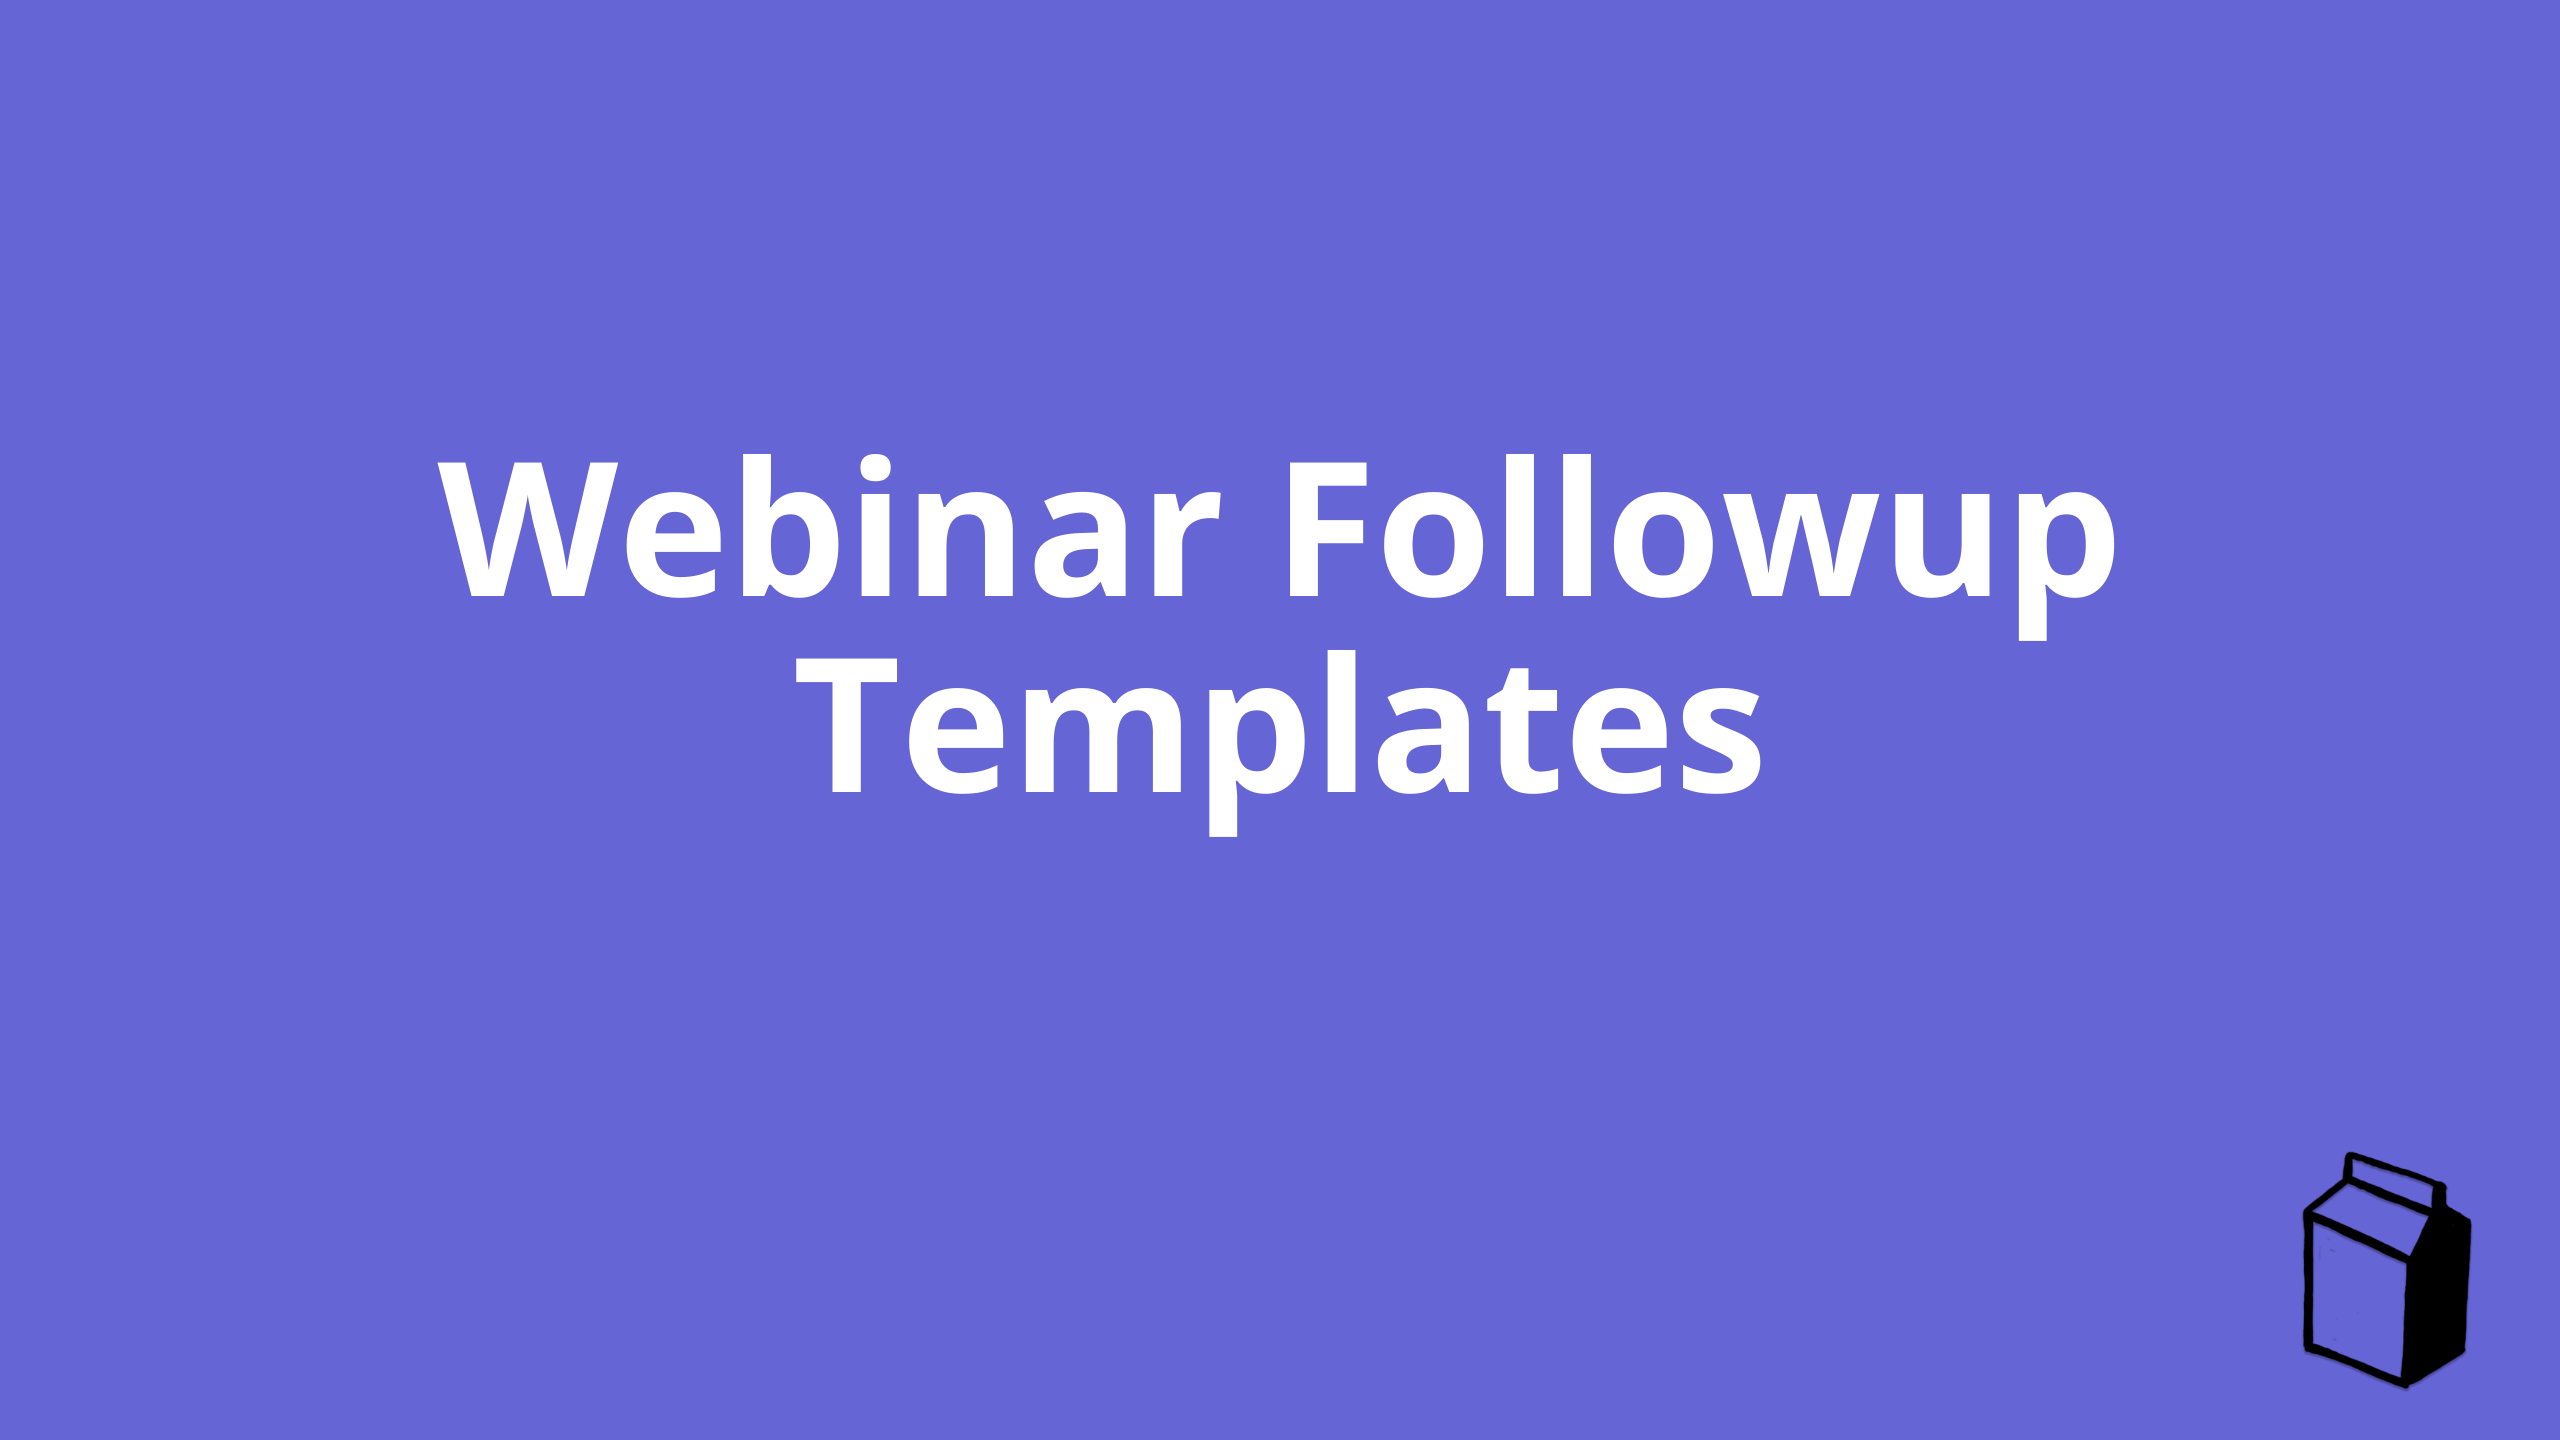 5 email templates for followup